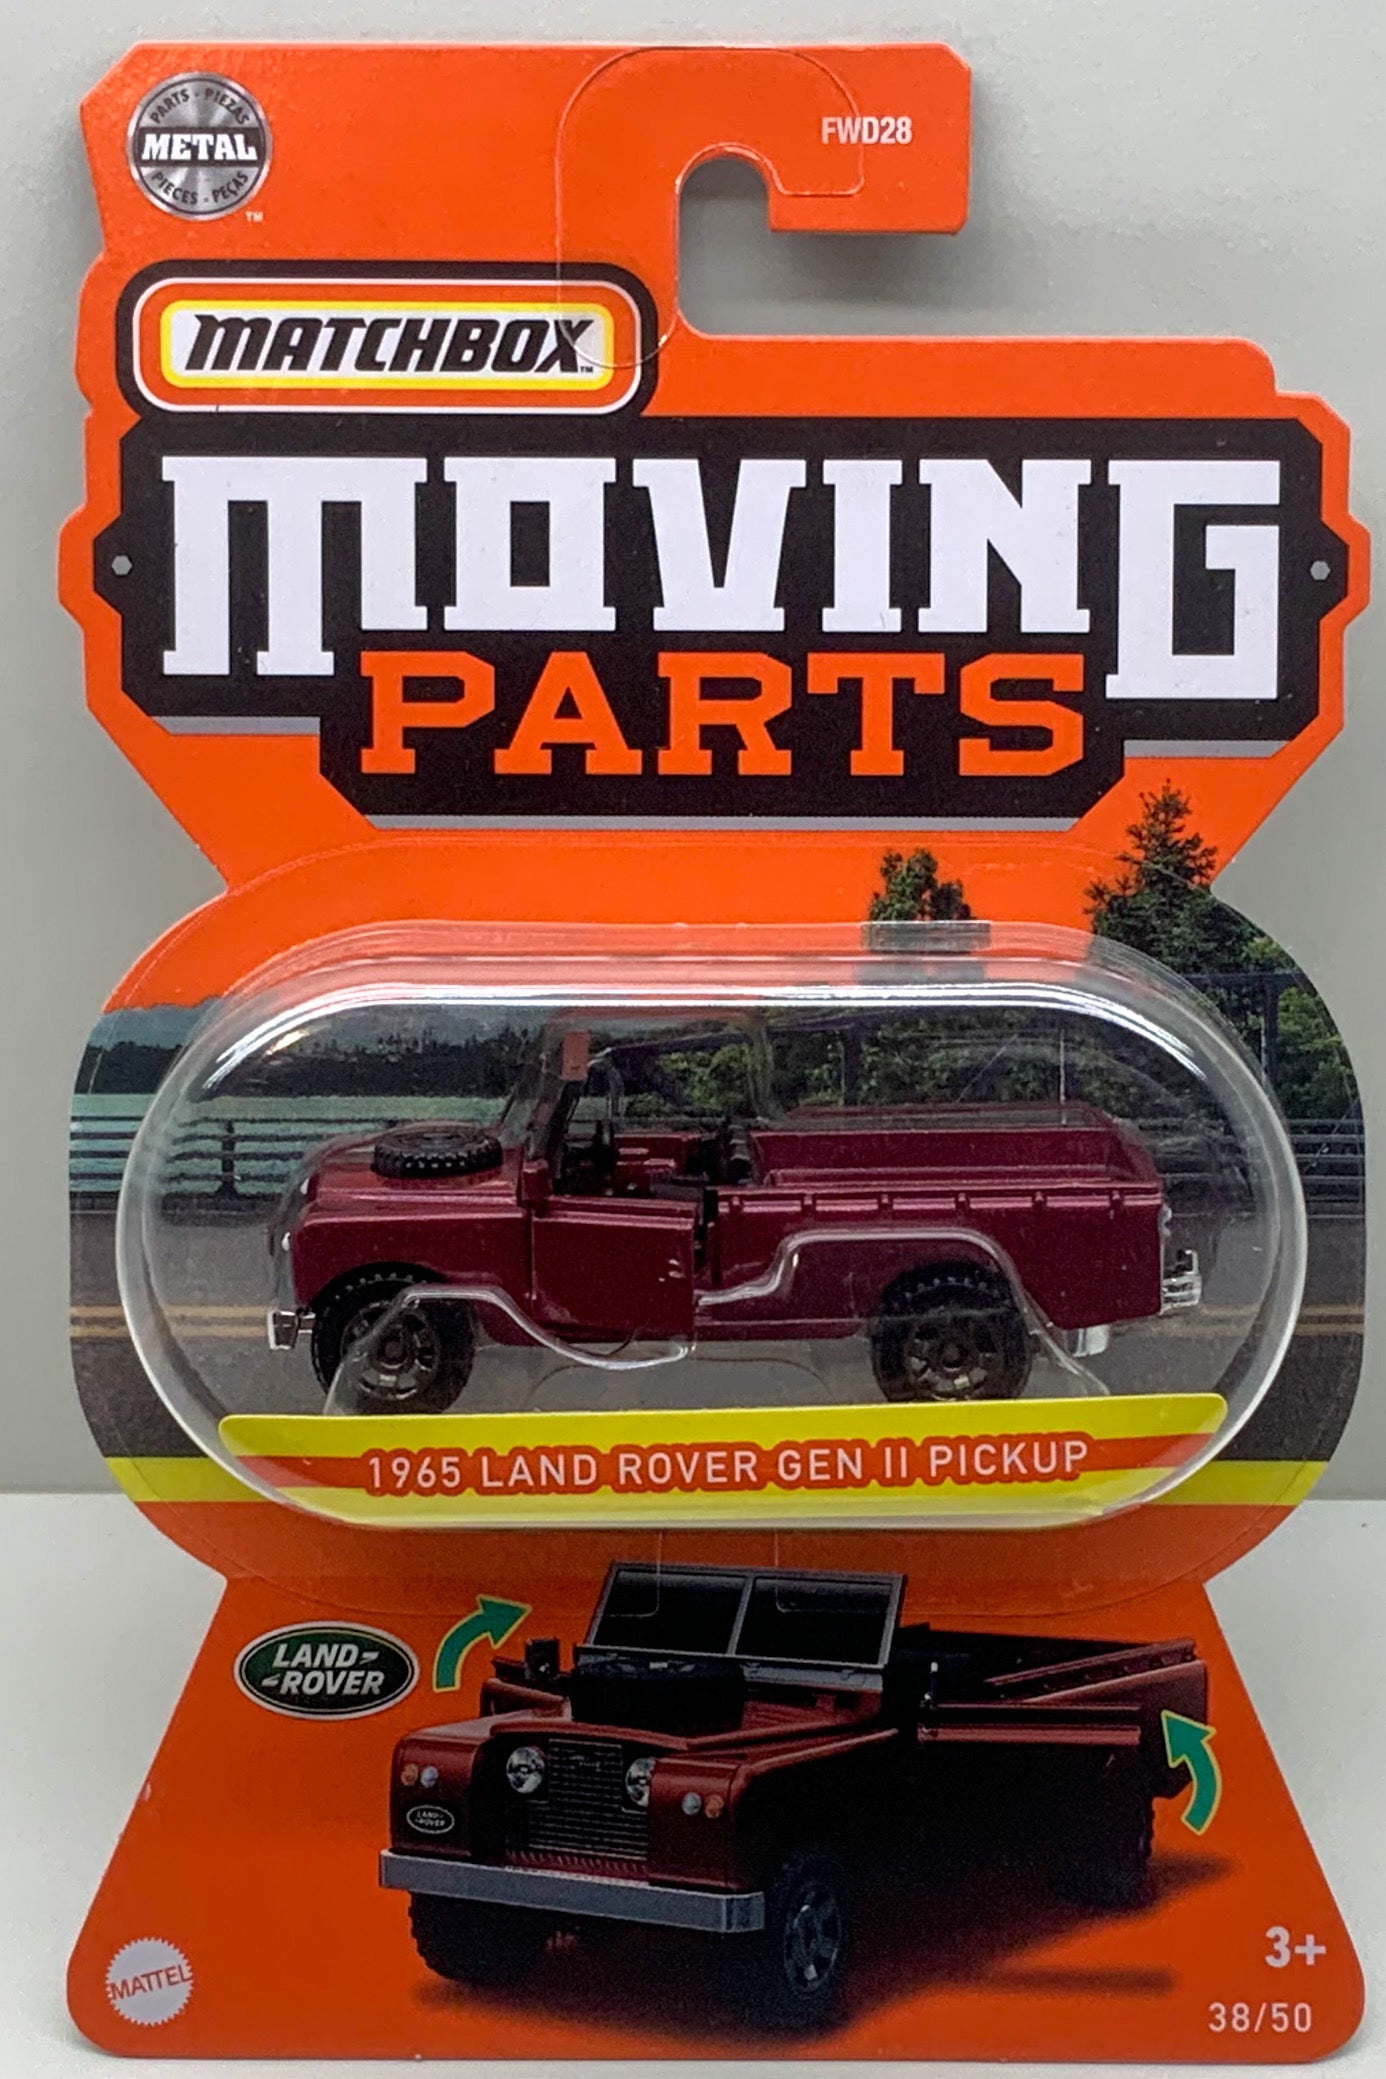 Buy at Tatoy Matchbox Moving Parts 1965 Land Rover Gen II Pickup number 38 from set of 50 Metal Mattel FWD28